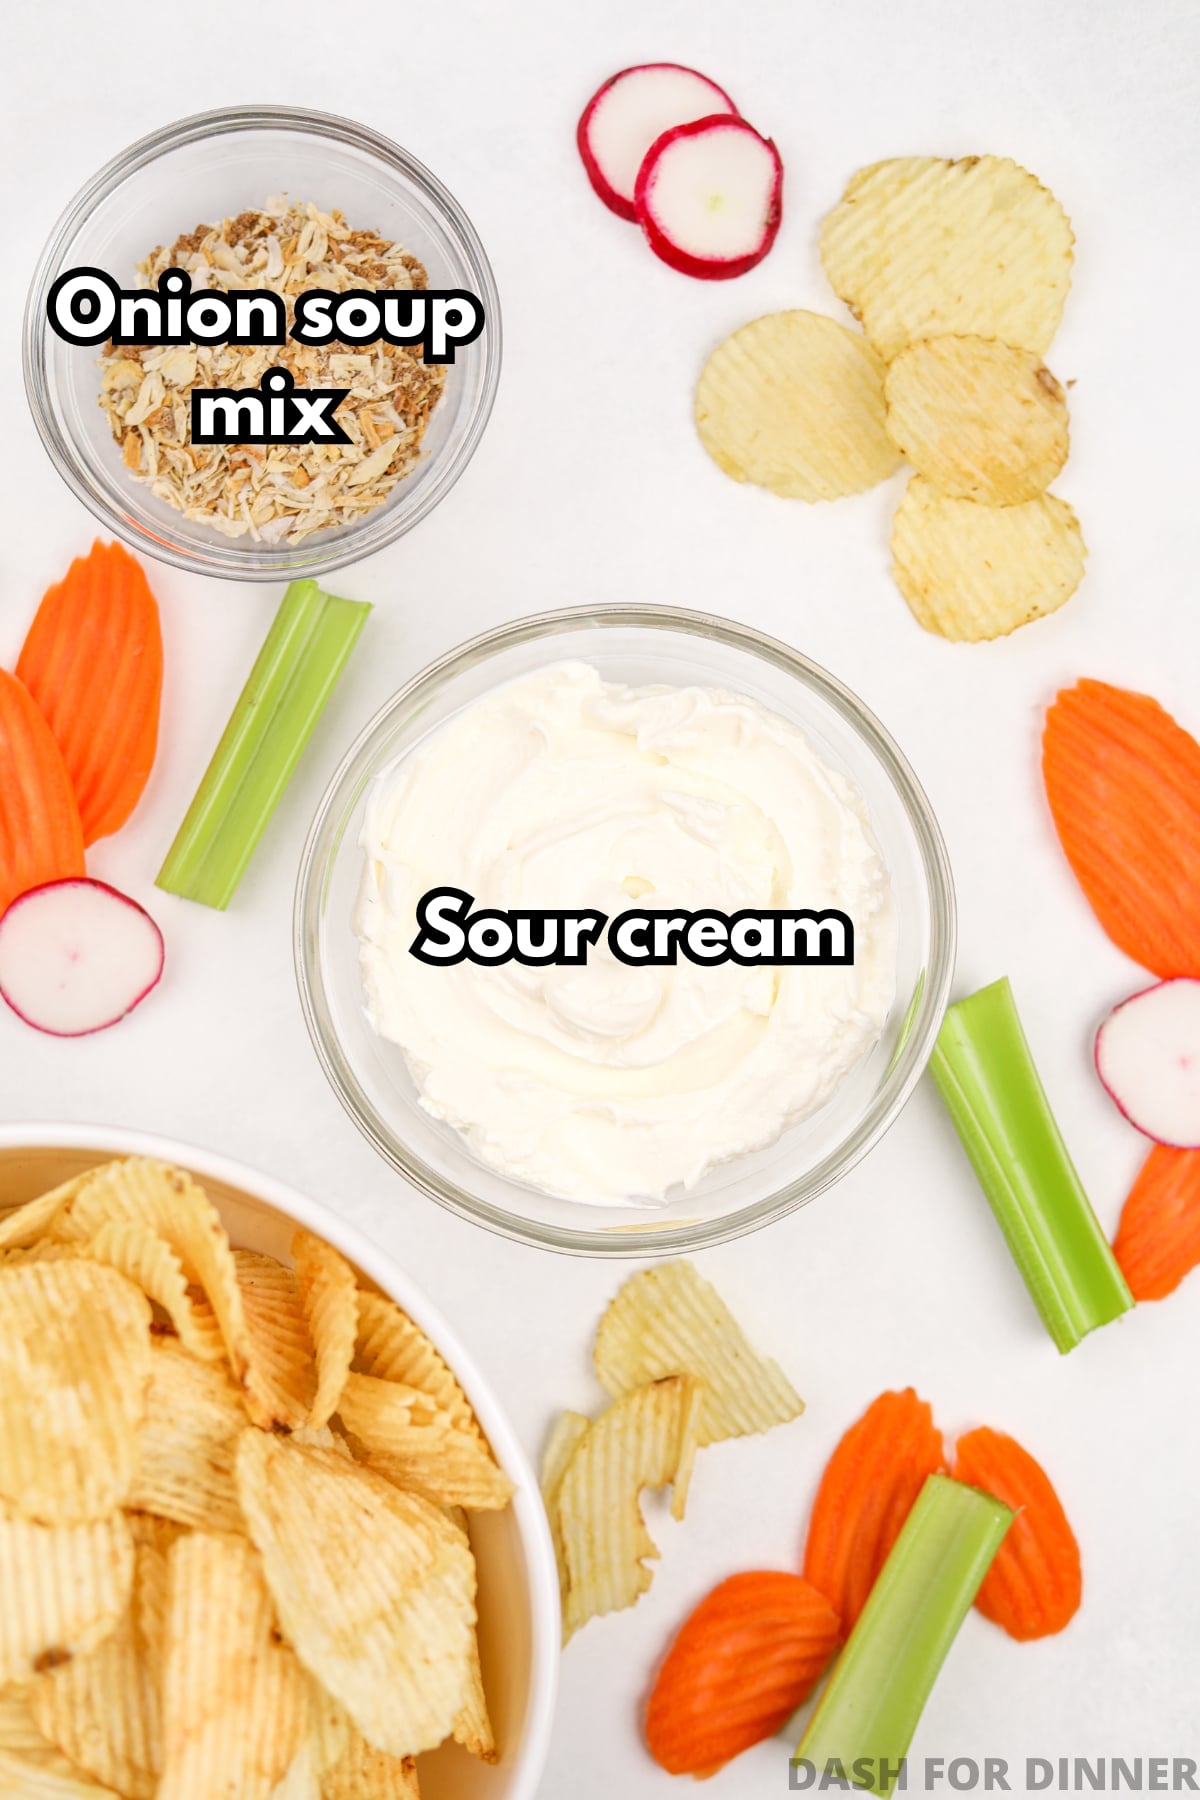 The ingredients needed to make onion dip: onion soup mix and sour cream.